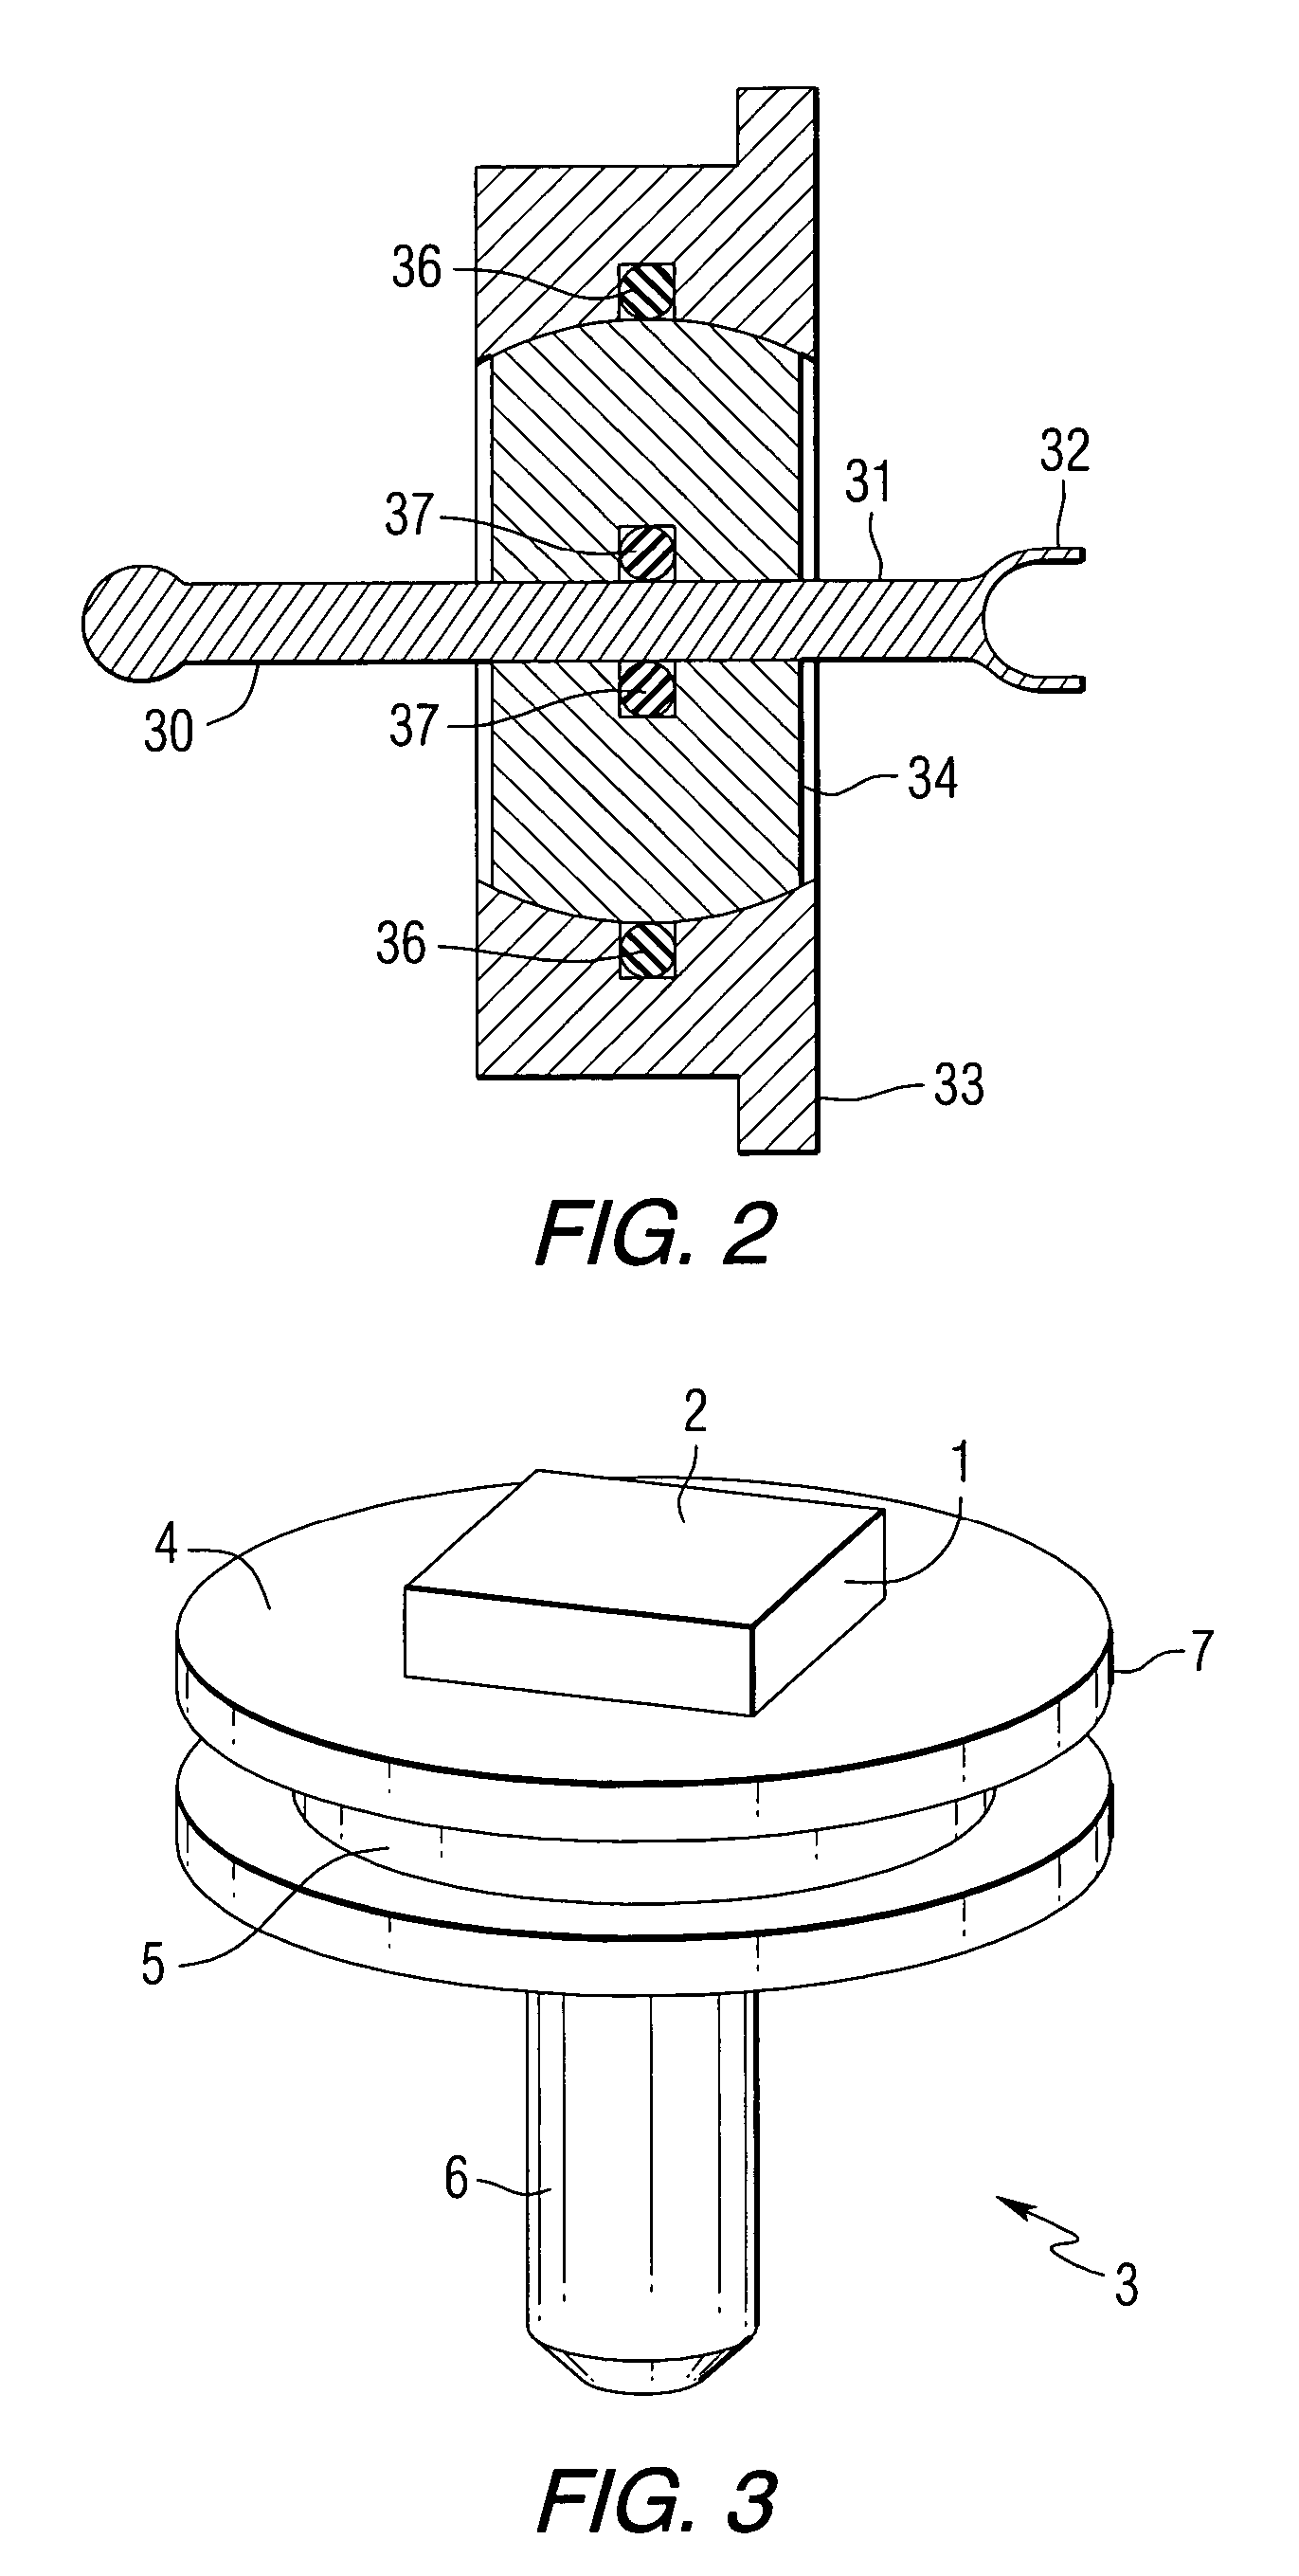 Method and apparatus for preparing specimens for microscopy